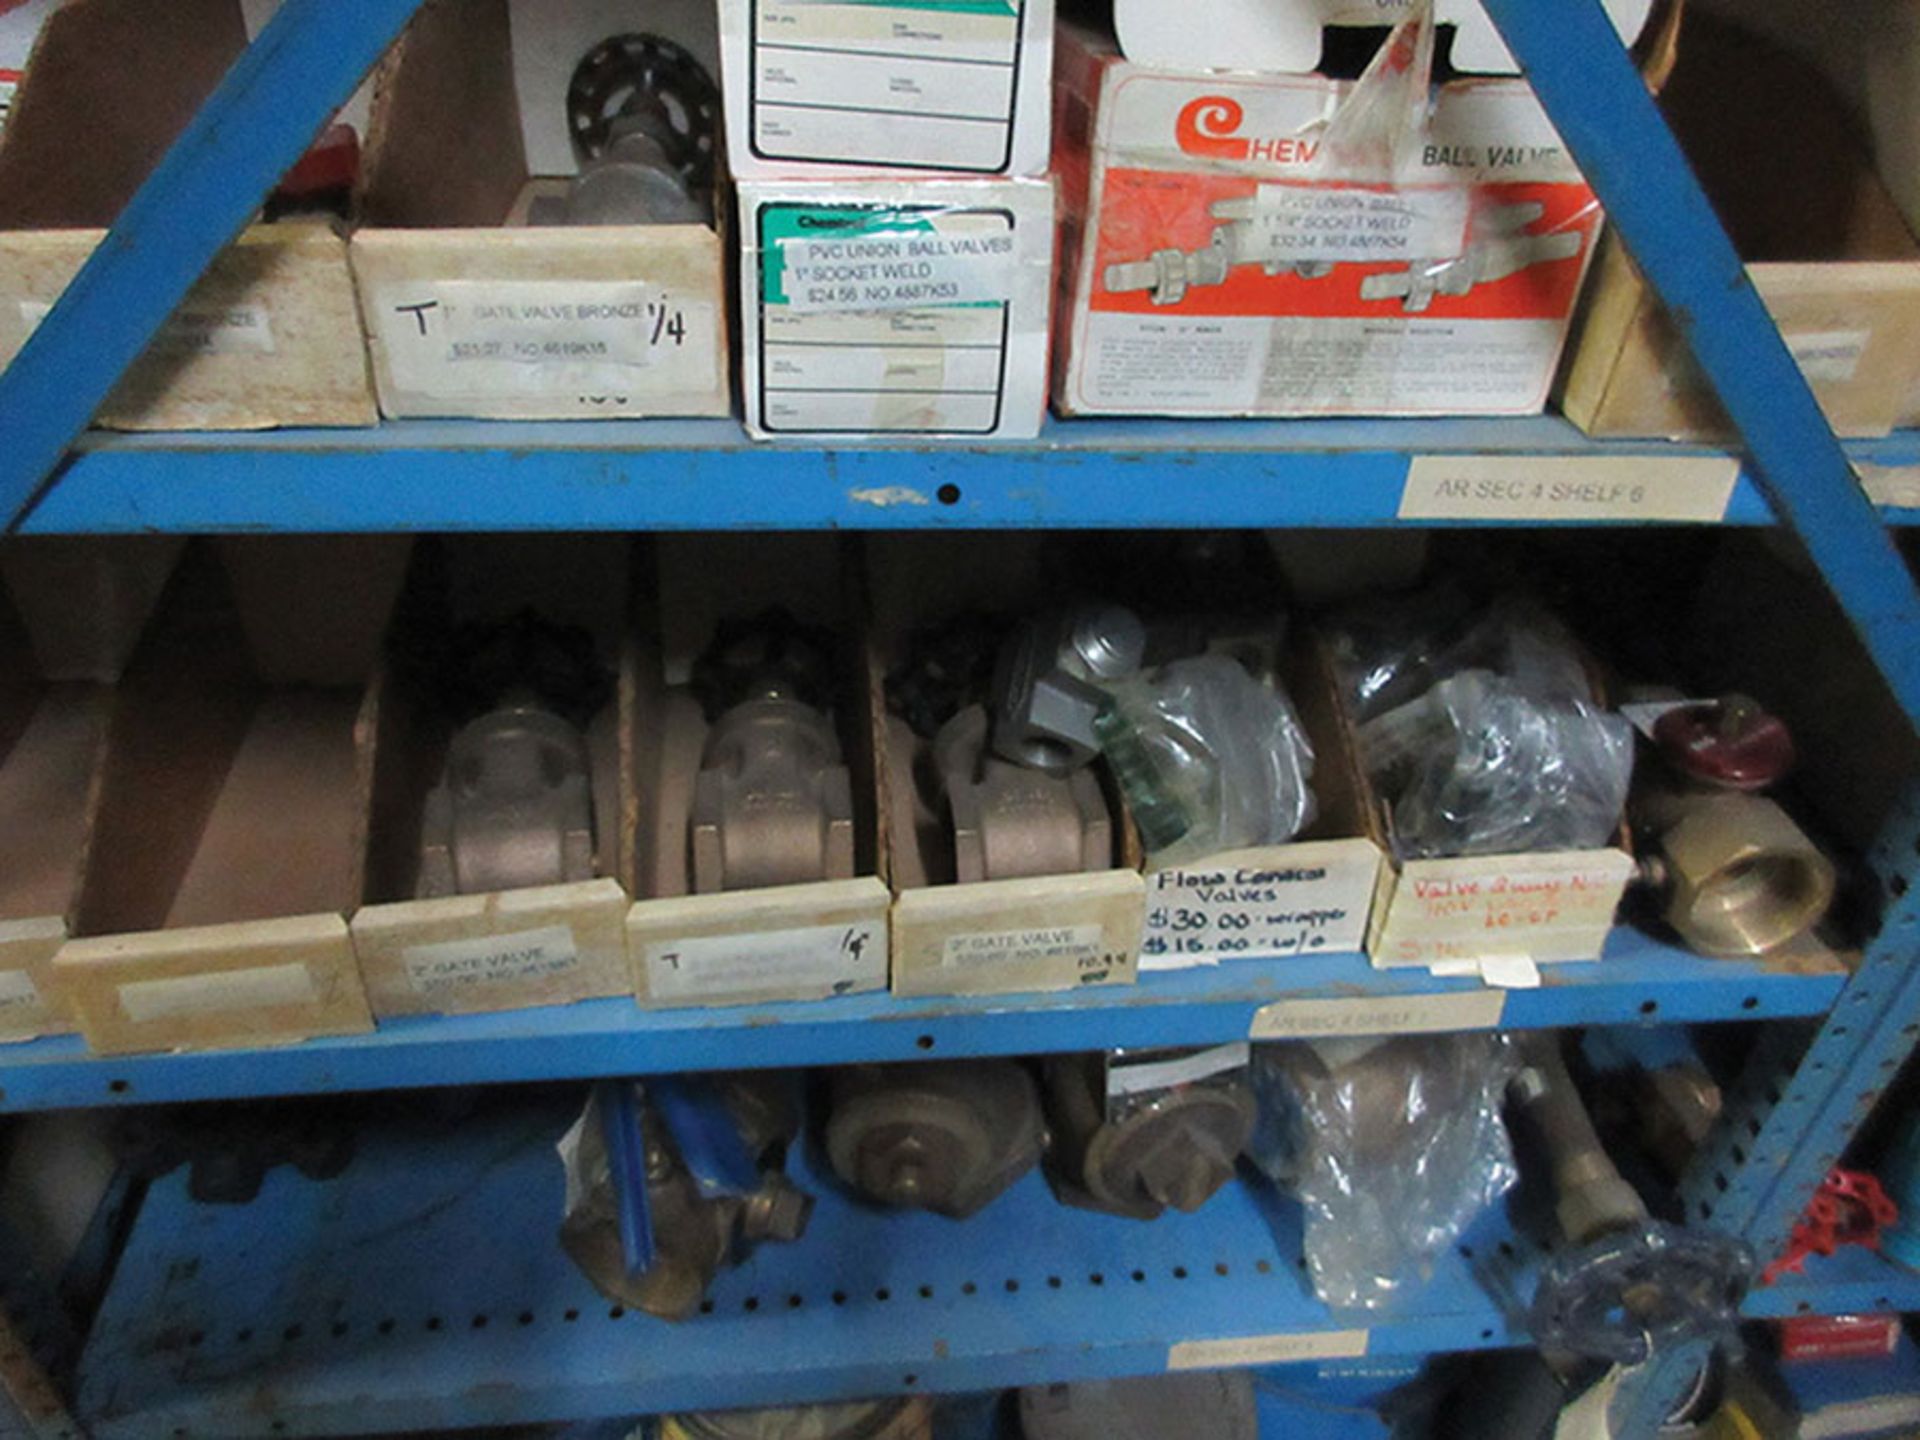 CONTENTS ON LOWER SECTION OF SHELF UNIT: DIE SPRINGS, GATE VALVES, COUPLINGS, UNIONS, AND TEES *** - Image 8 of 8